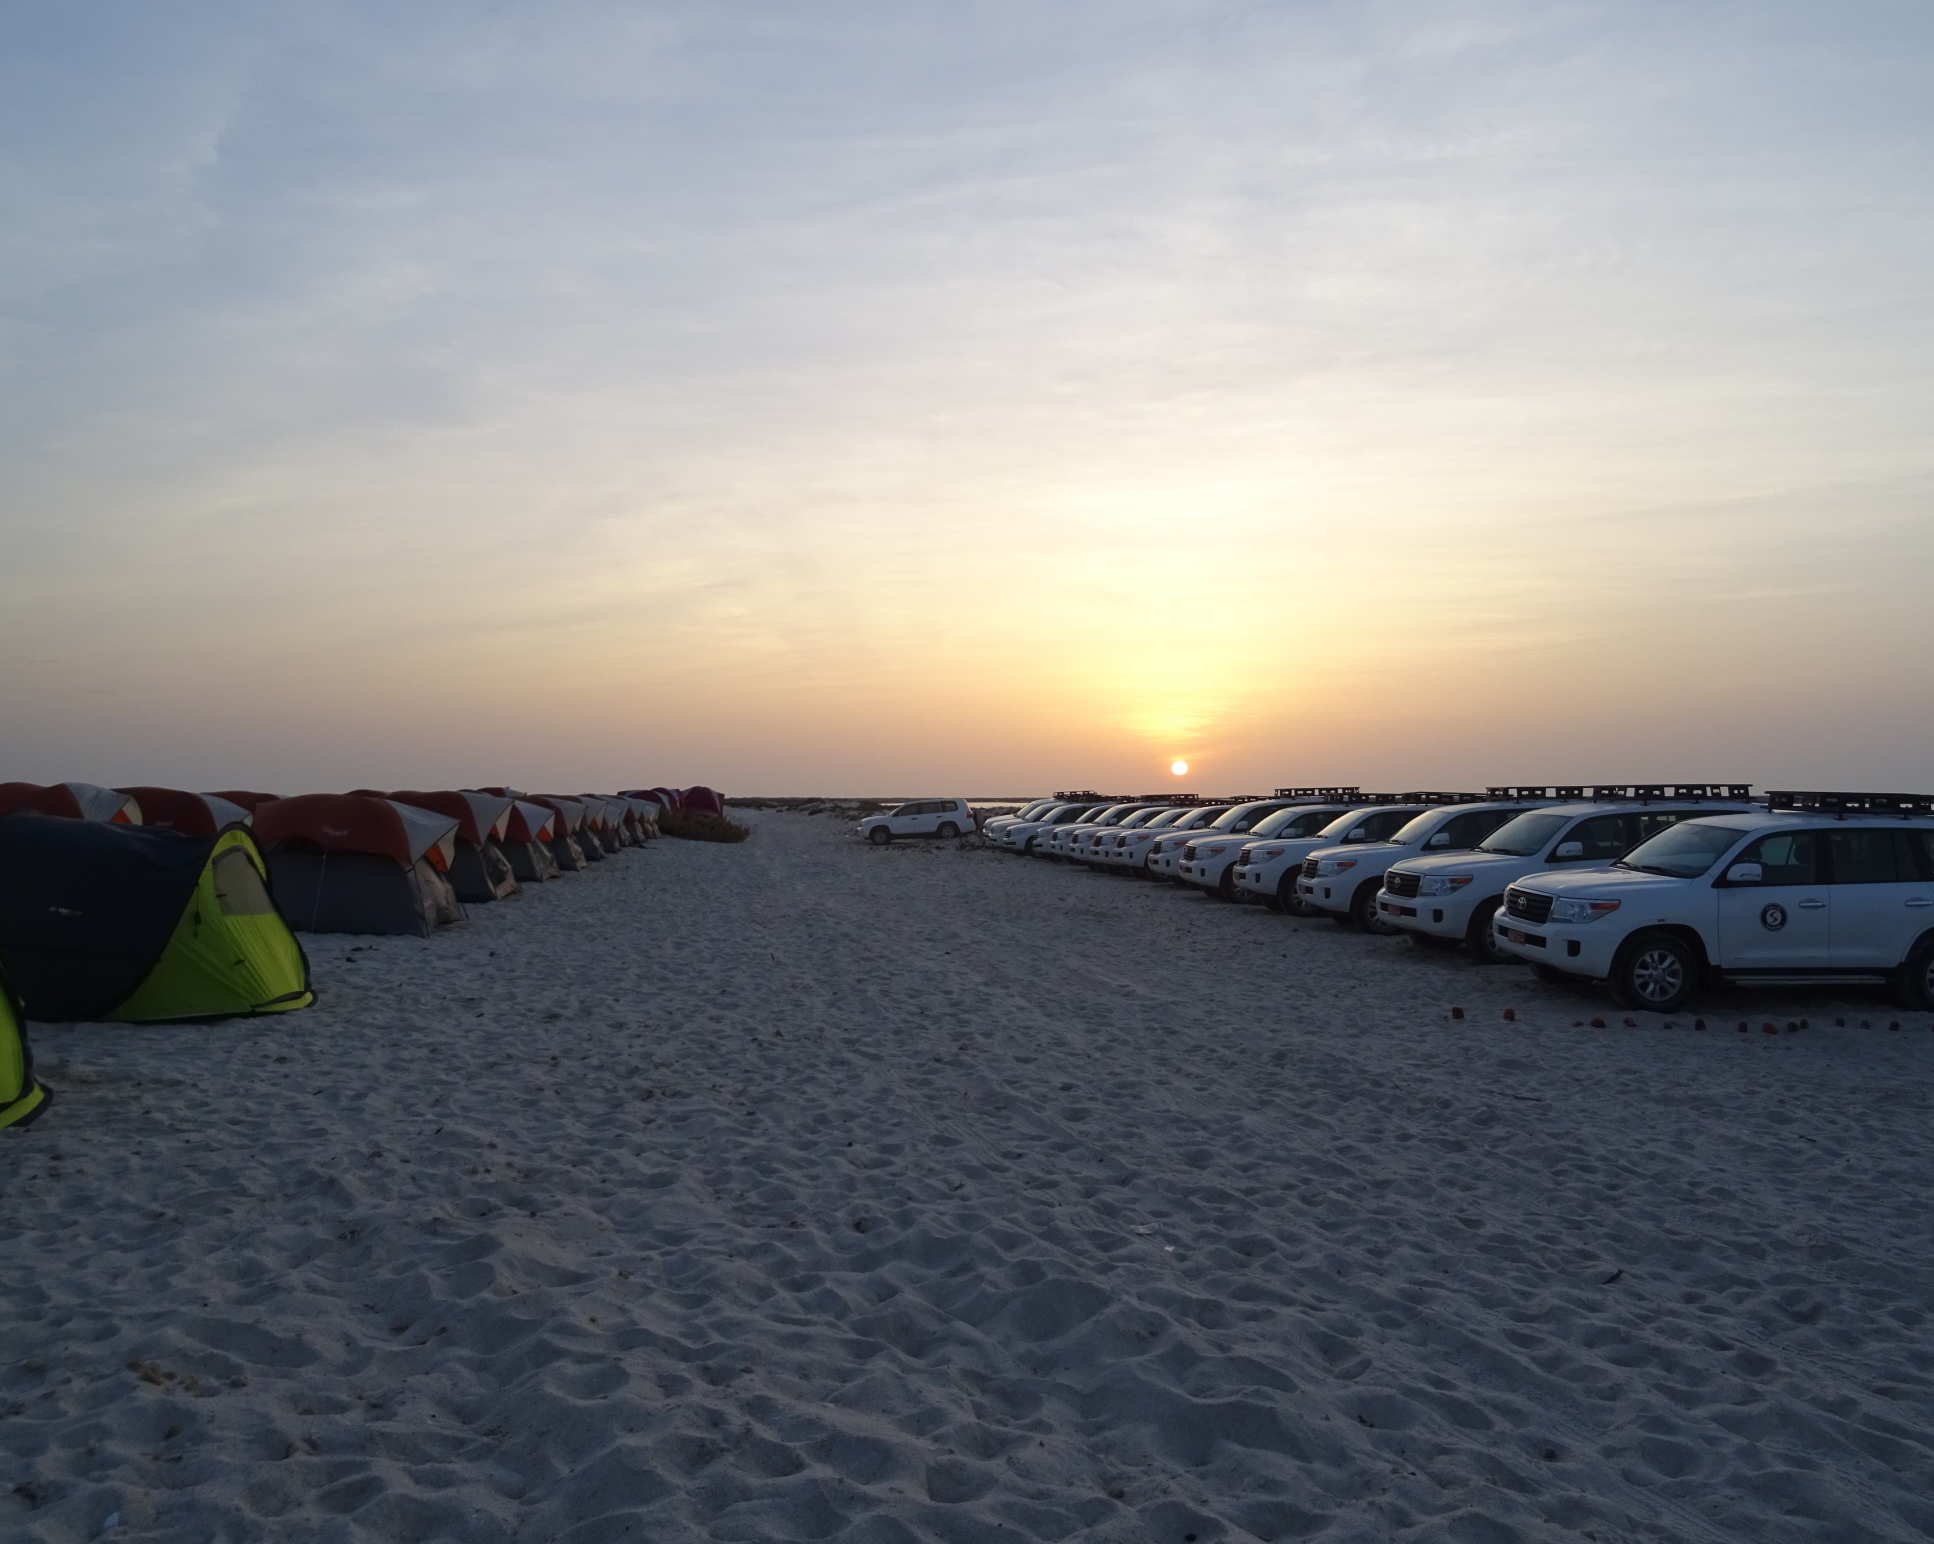 Tents on sandy beaches in Oman for Petroleum Fieldwork